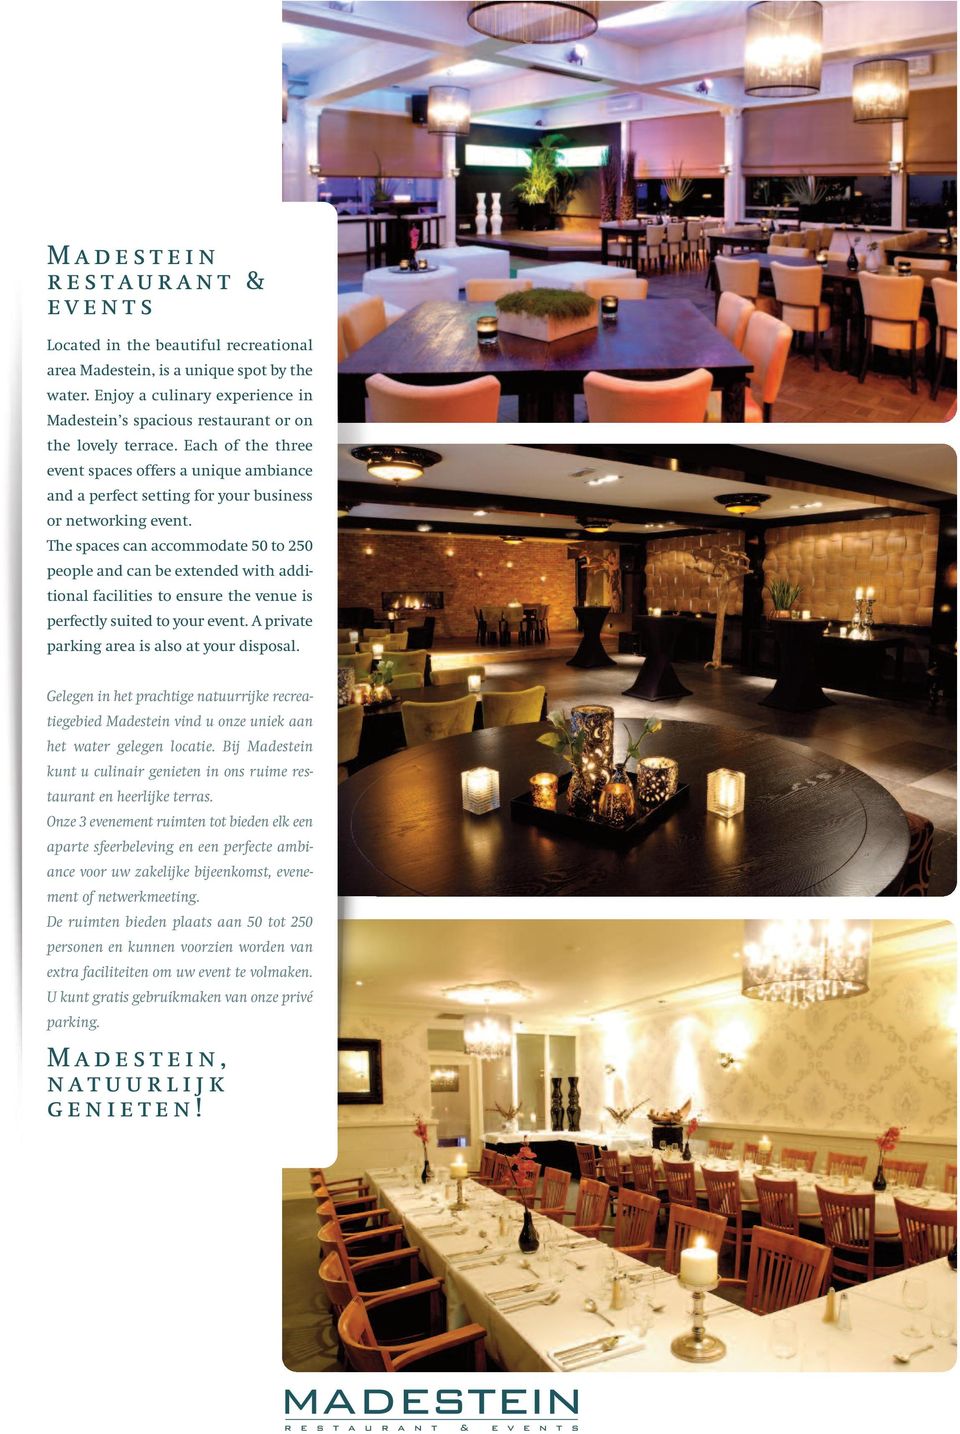 Each of the three event spaces offers a unique ambiance and a perfect setting for your business or networking event.